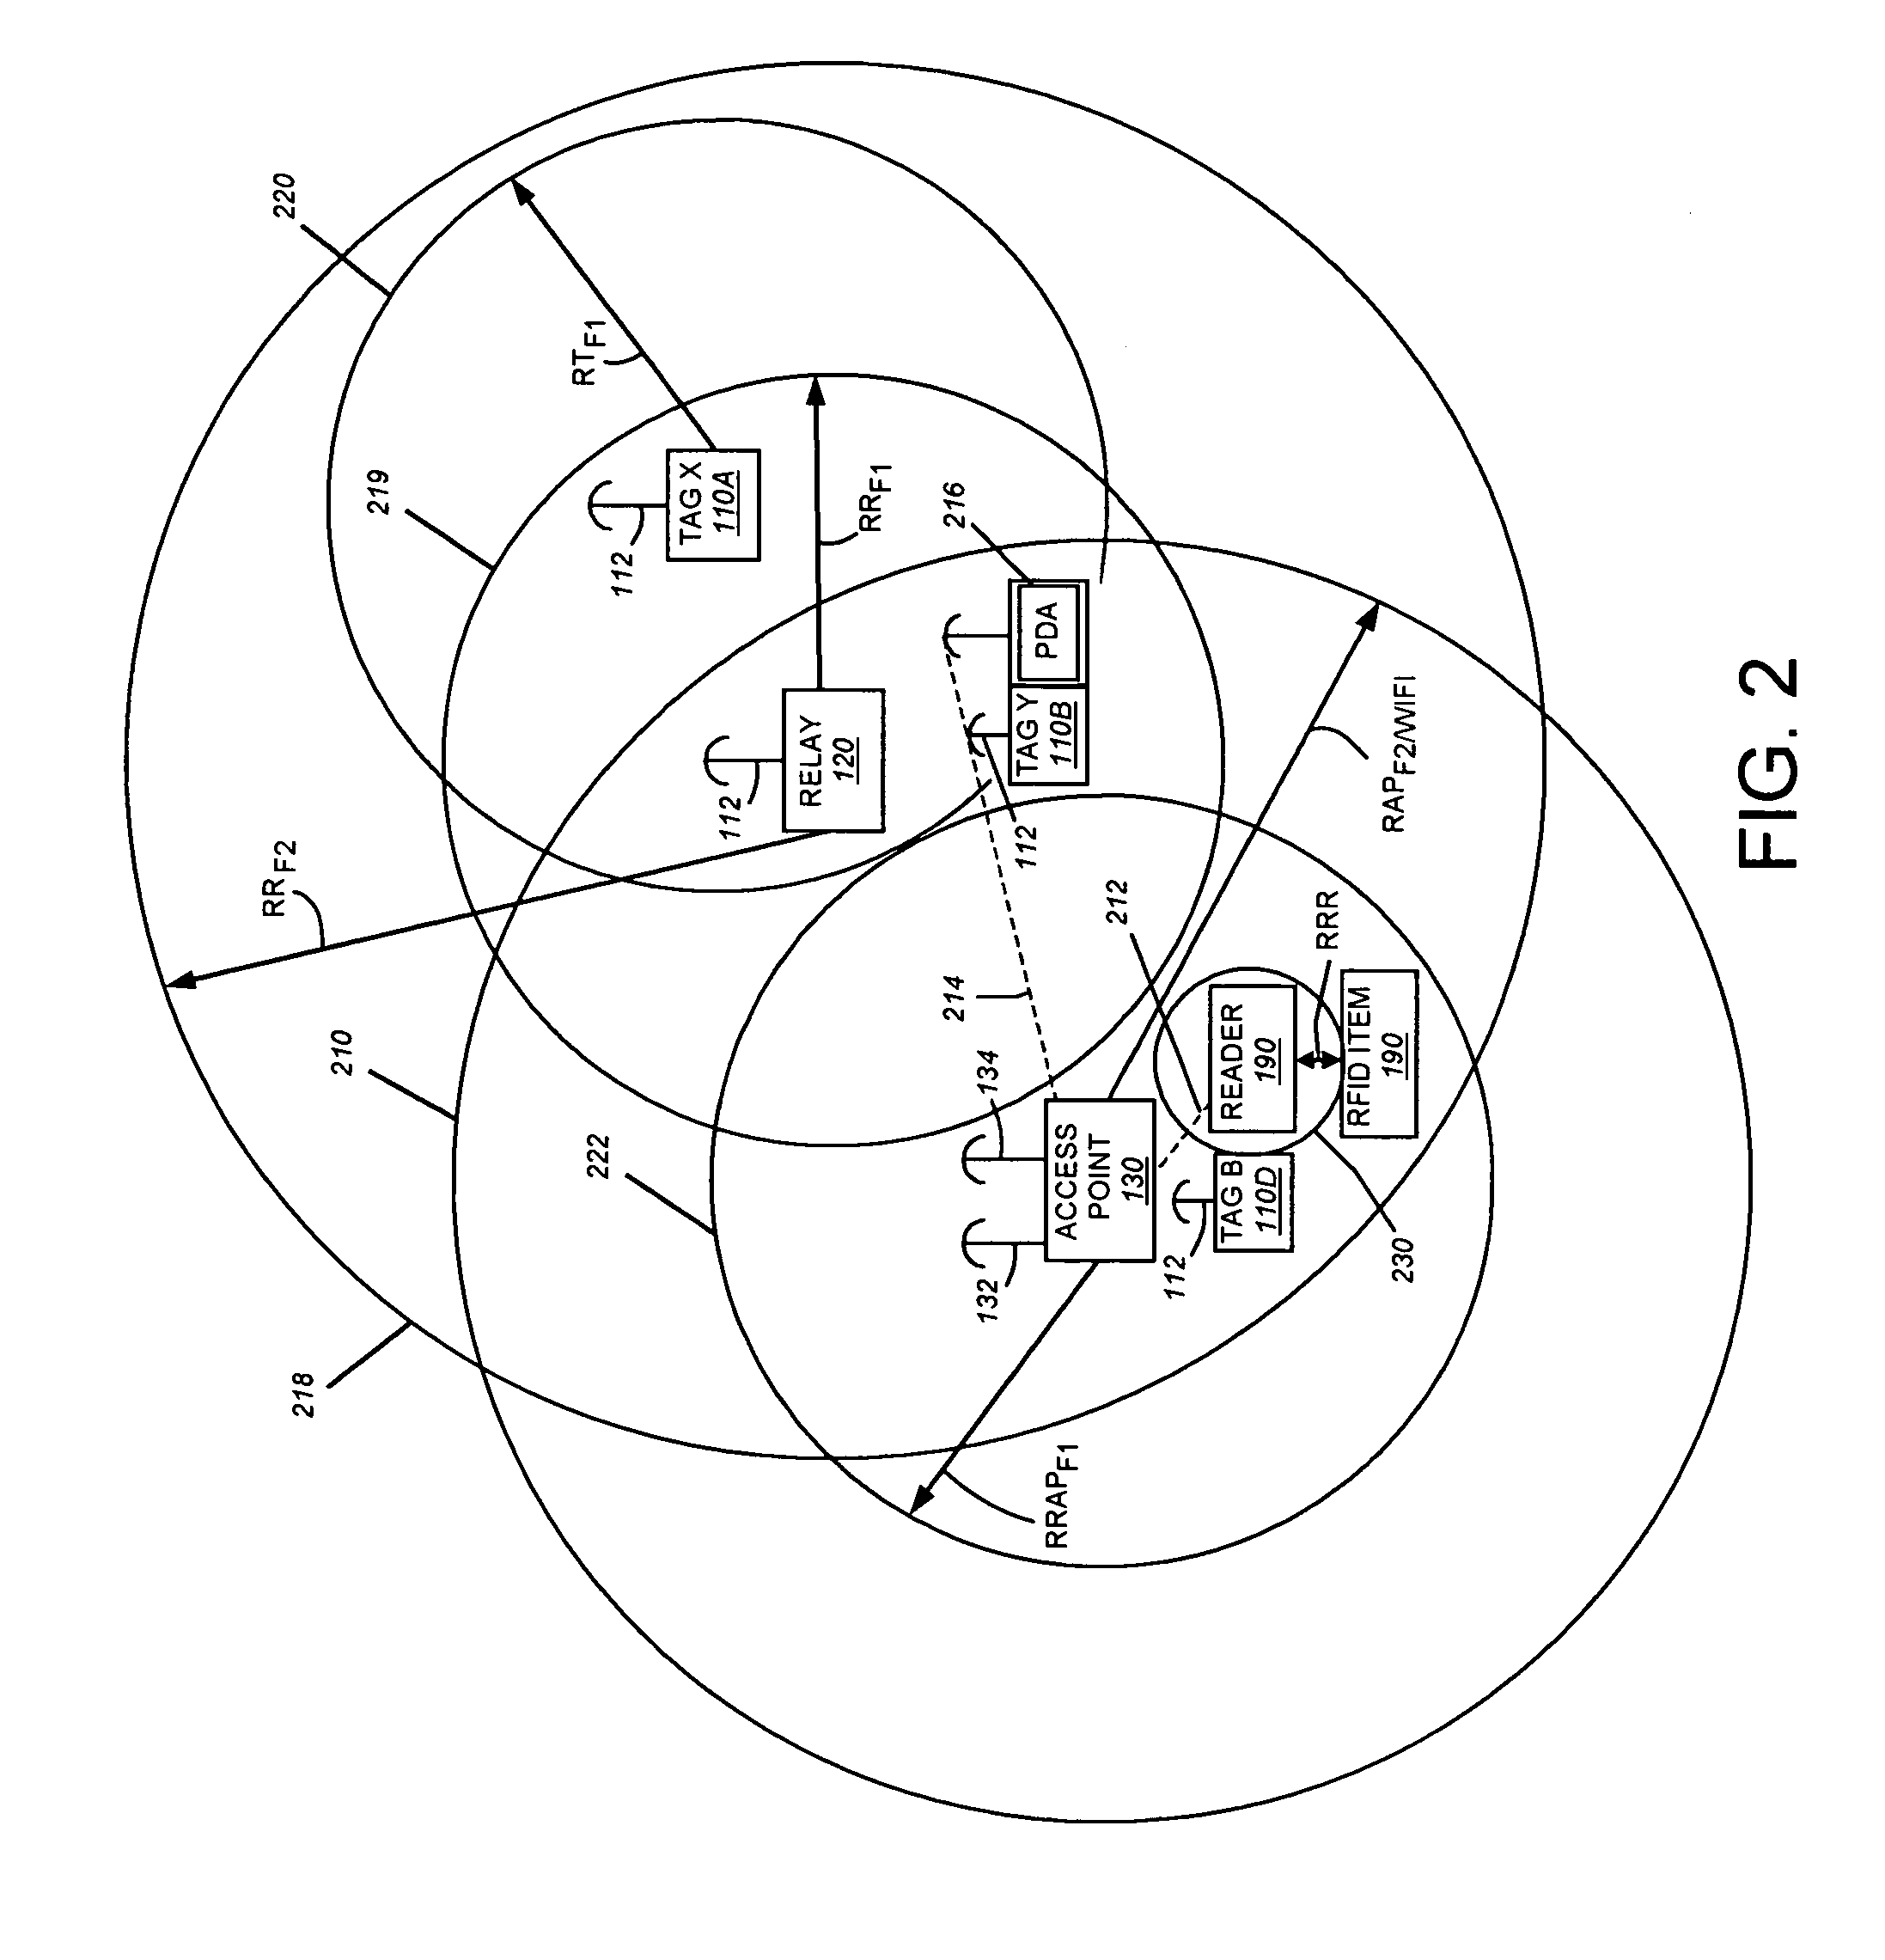 System and method for locating and communicating with personnel and equipment in a facility